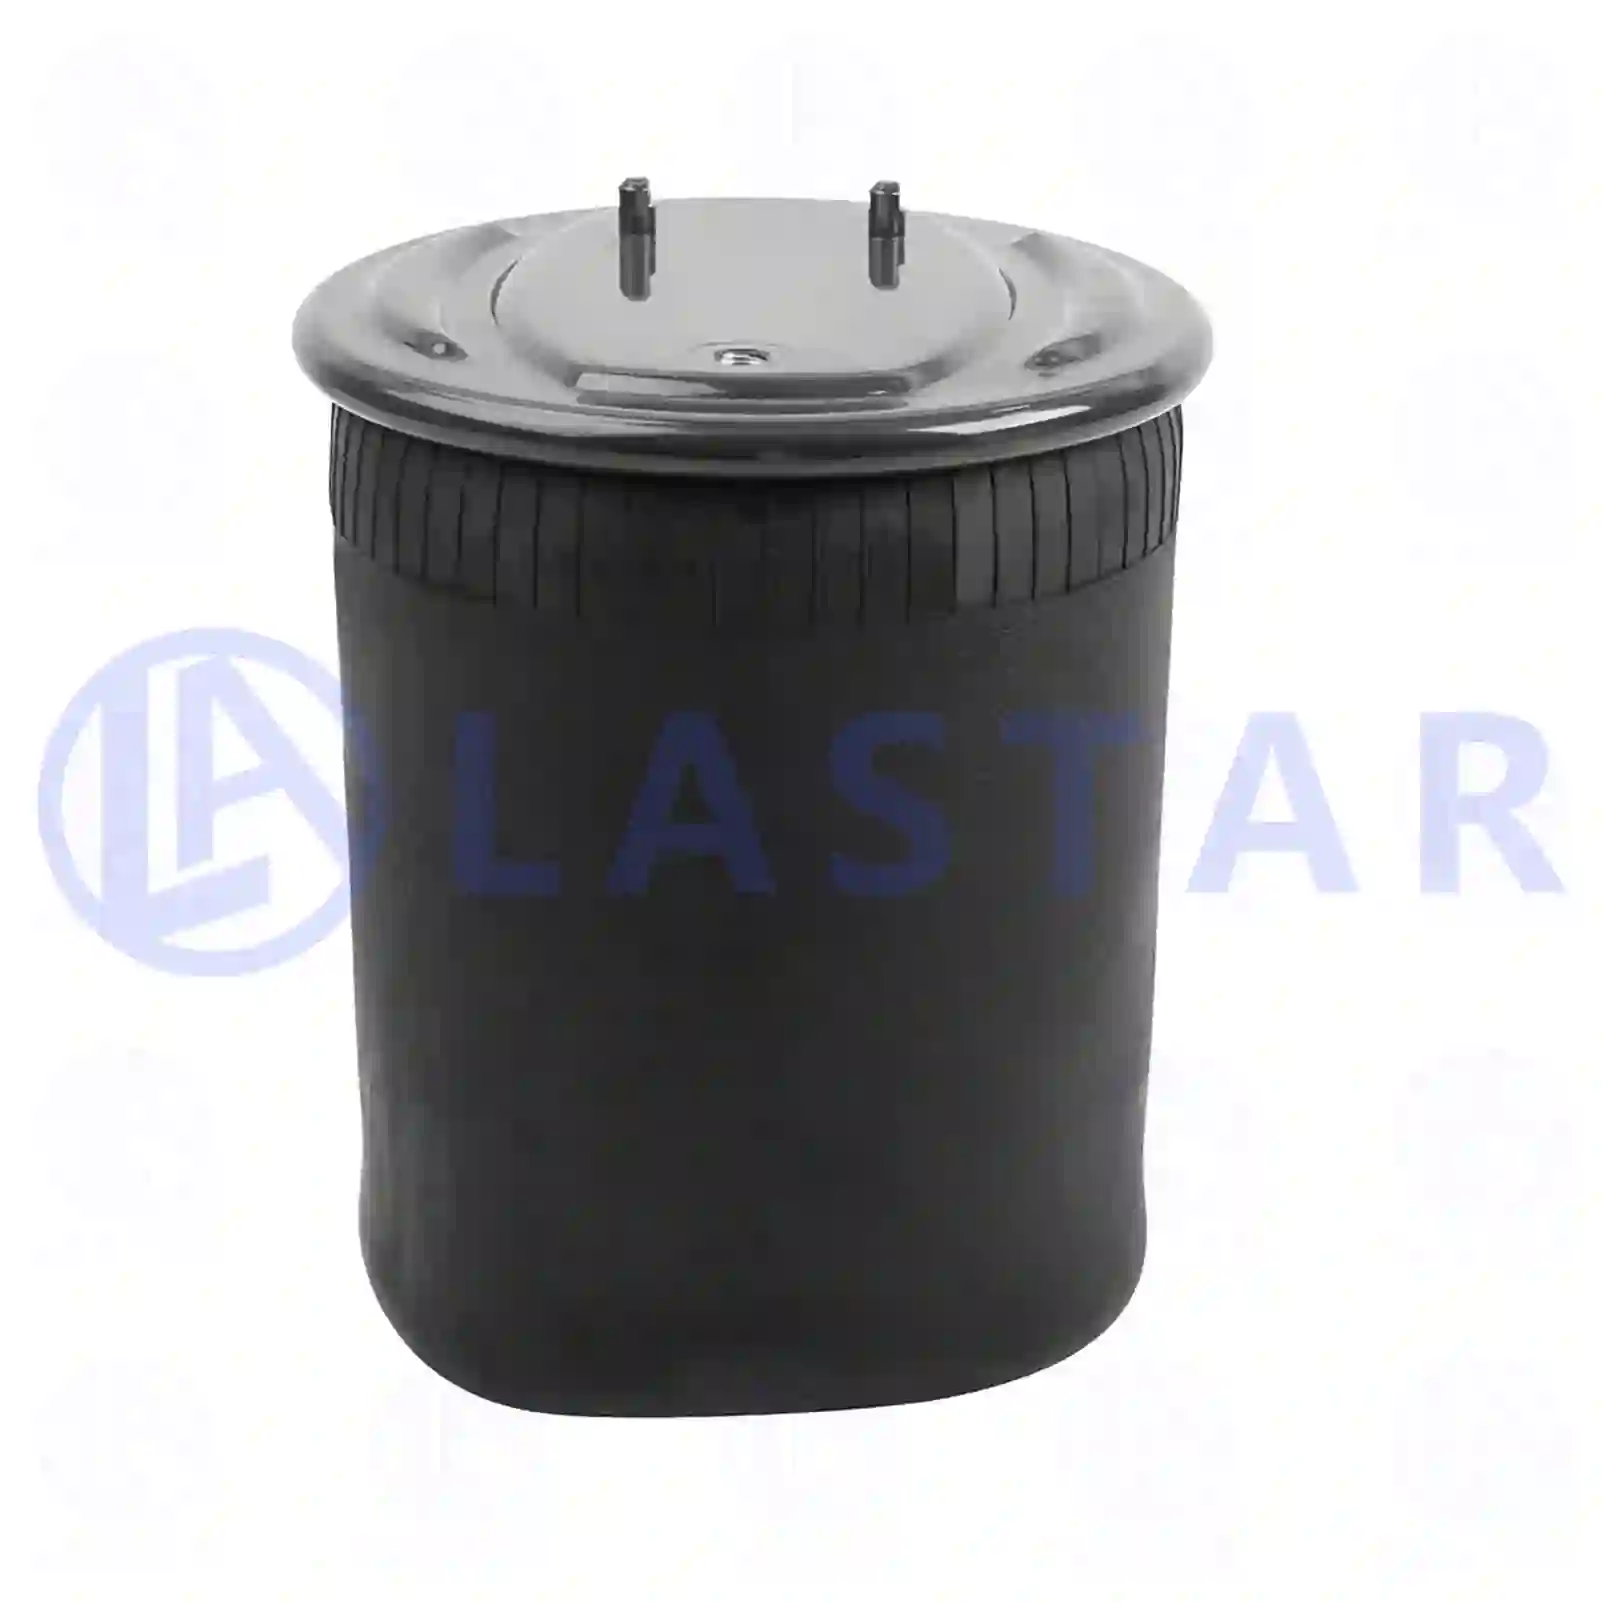 Air spring, with steel piston, 77728382, 1944314, 1774804, 1903608, 2357460, ZG40745-0008 ||  77728382 Lastar Spare Part | Truck Spare Parts, Auotomotive Spare Parts Air spring, with steel piston, 77728382, 1944314, 1774804, 1903608, 2357460, ZG40745-0008 ||  77728382 Lastar Spare Part | Truck Spare Parts, Auotomotive Spare Parts